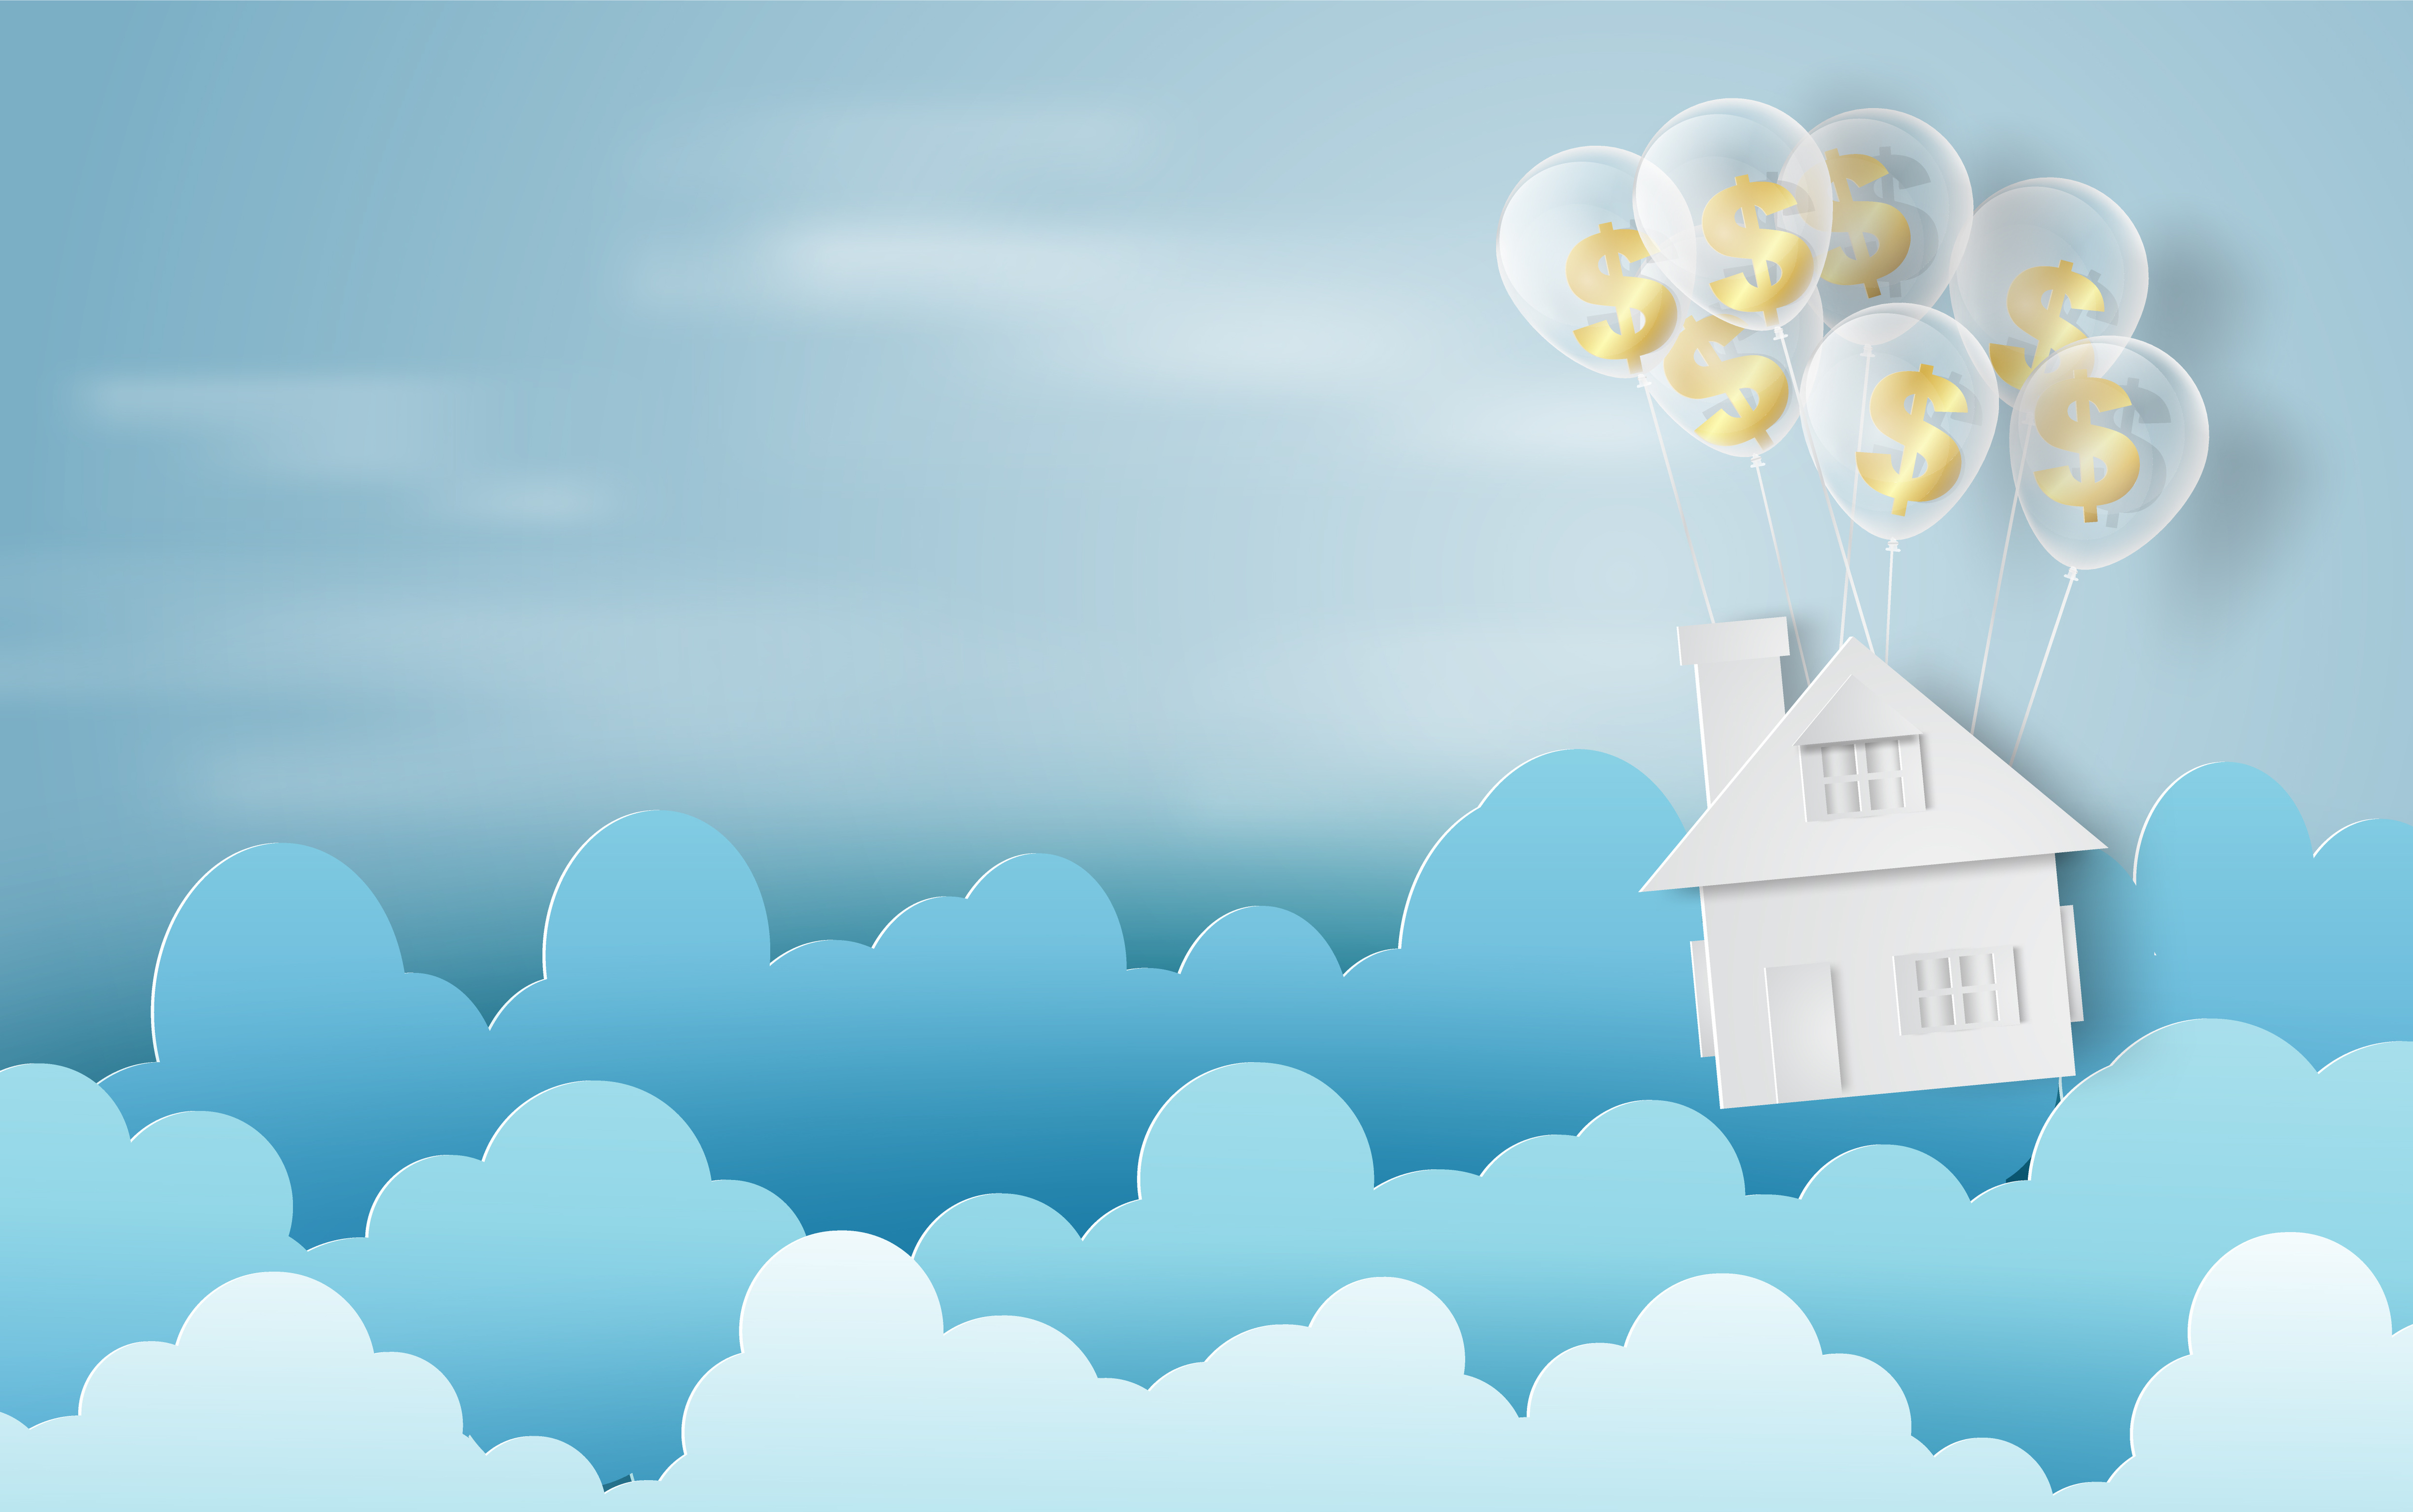 A home being lifted through the clouds by balloons containing dollar signs.